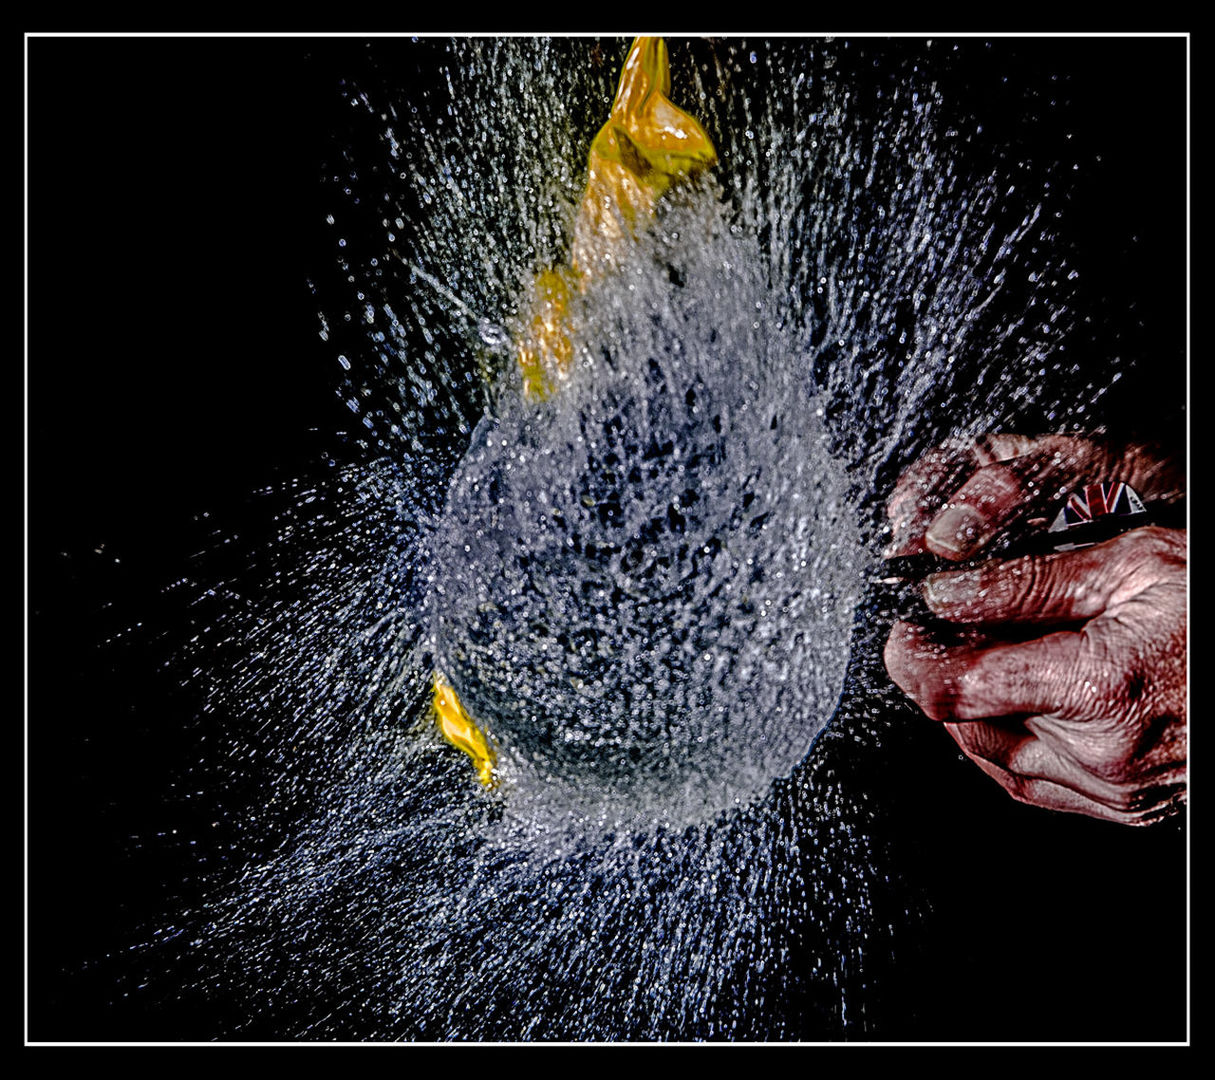 Close-up of yellow water balloon bursting against black background